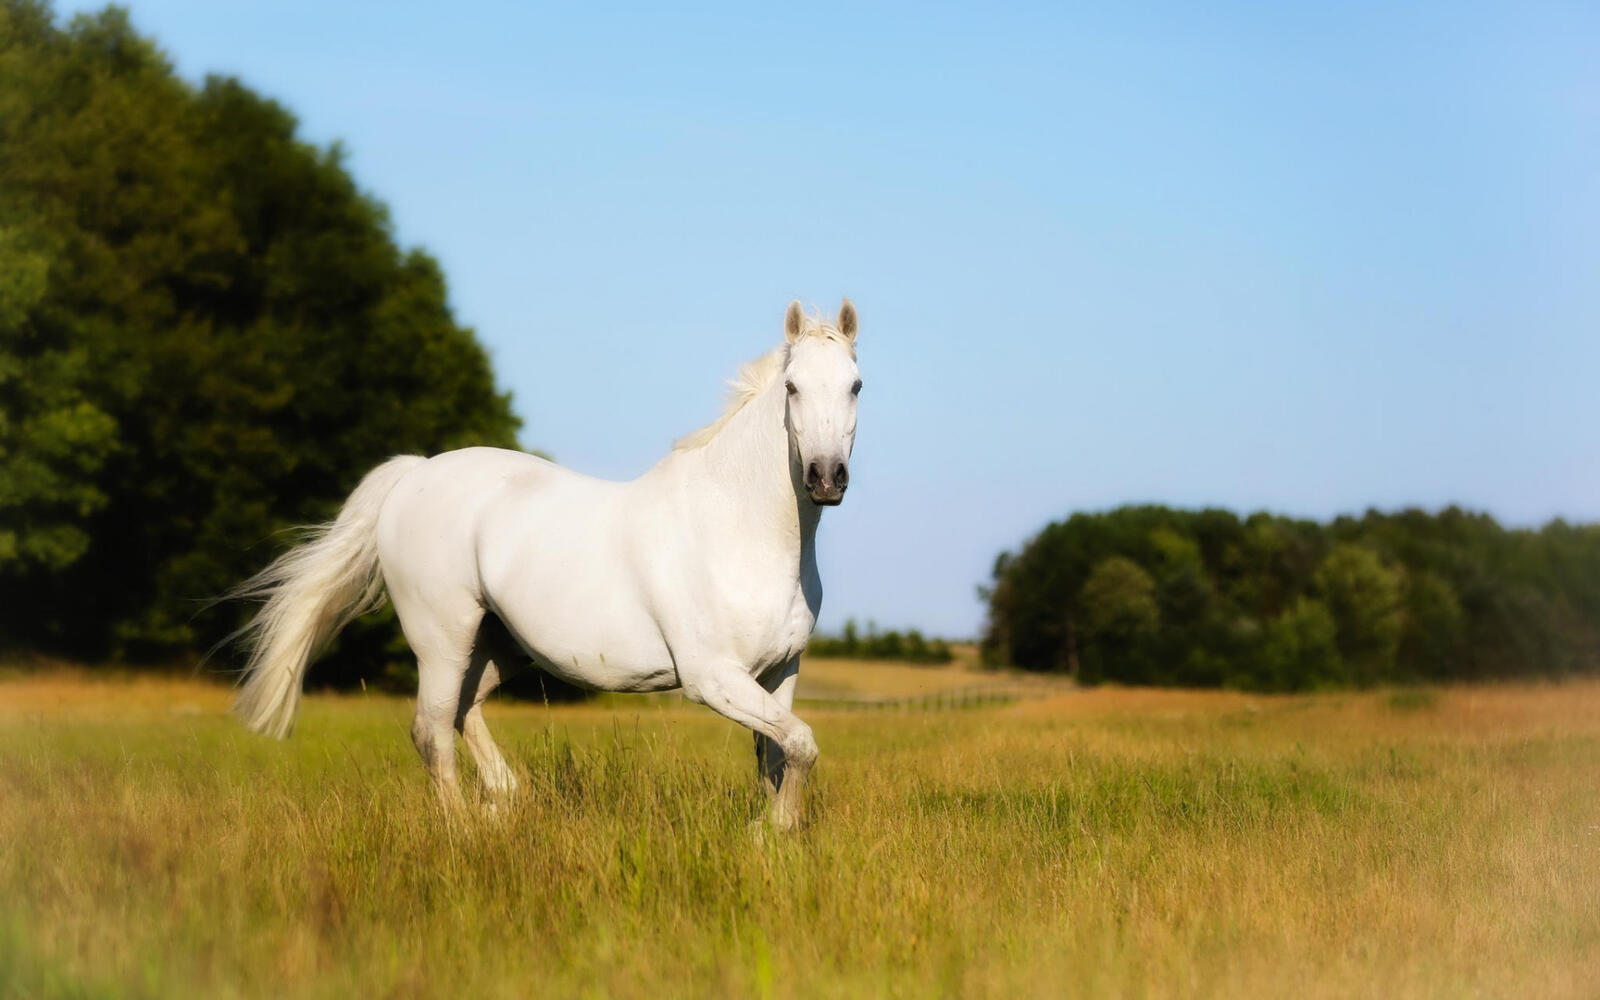 Wallpapers face trees horse on the desktop